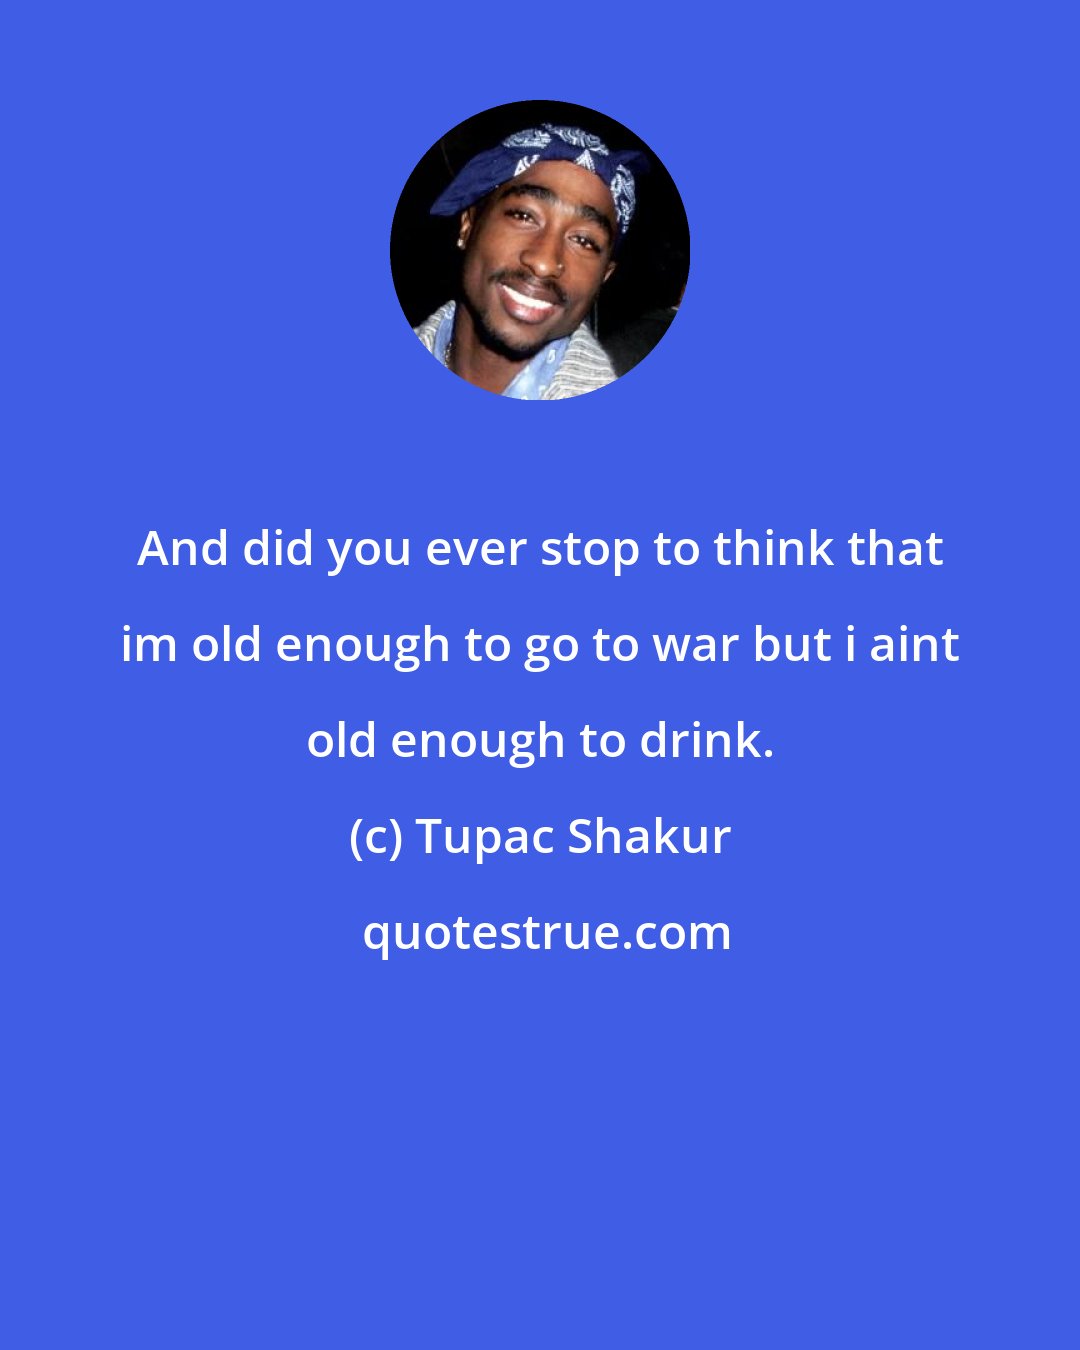 Tupac Shakur: And did you ever stop to think that im old enough to go to war but i aint old enough to drink.